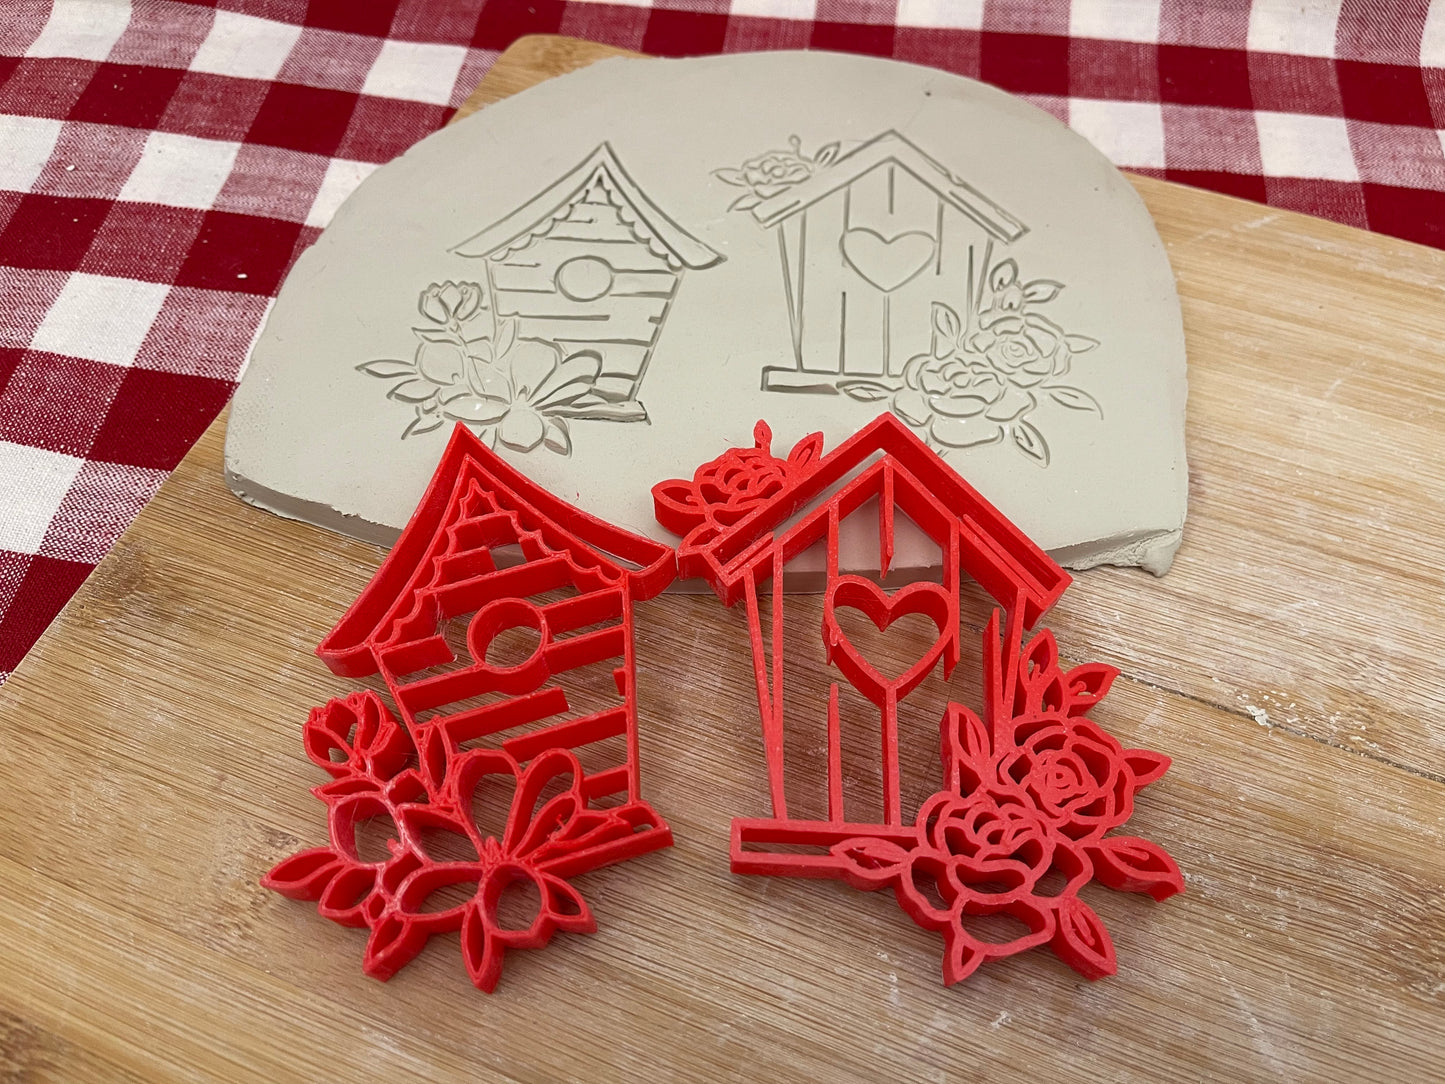 Birdhouse w/ flowers pottery stamp - Each or set, Pottery Tool, plastic 3d printed, multiple sizes